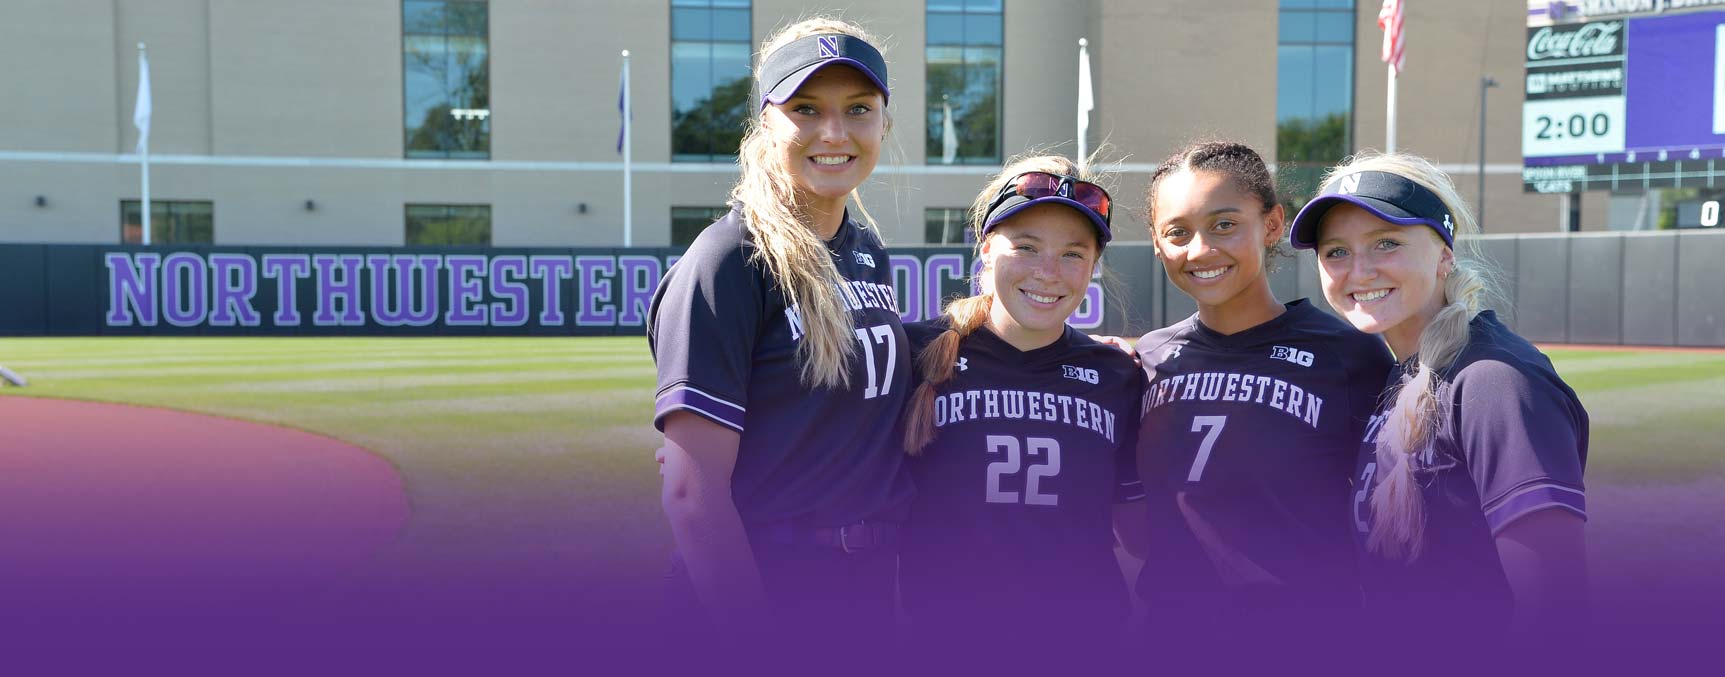 Four softball players posing for a group photo on the field